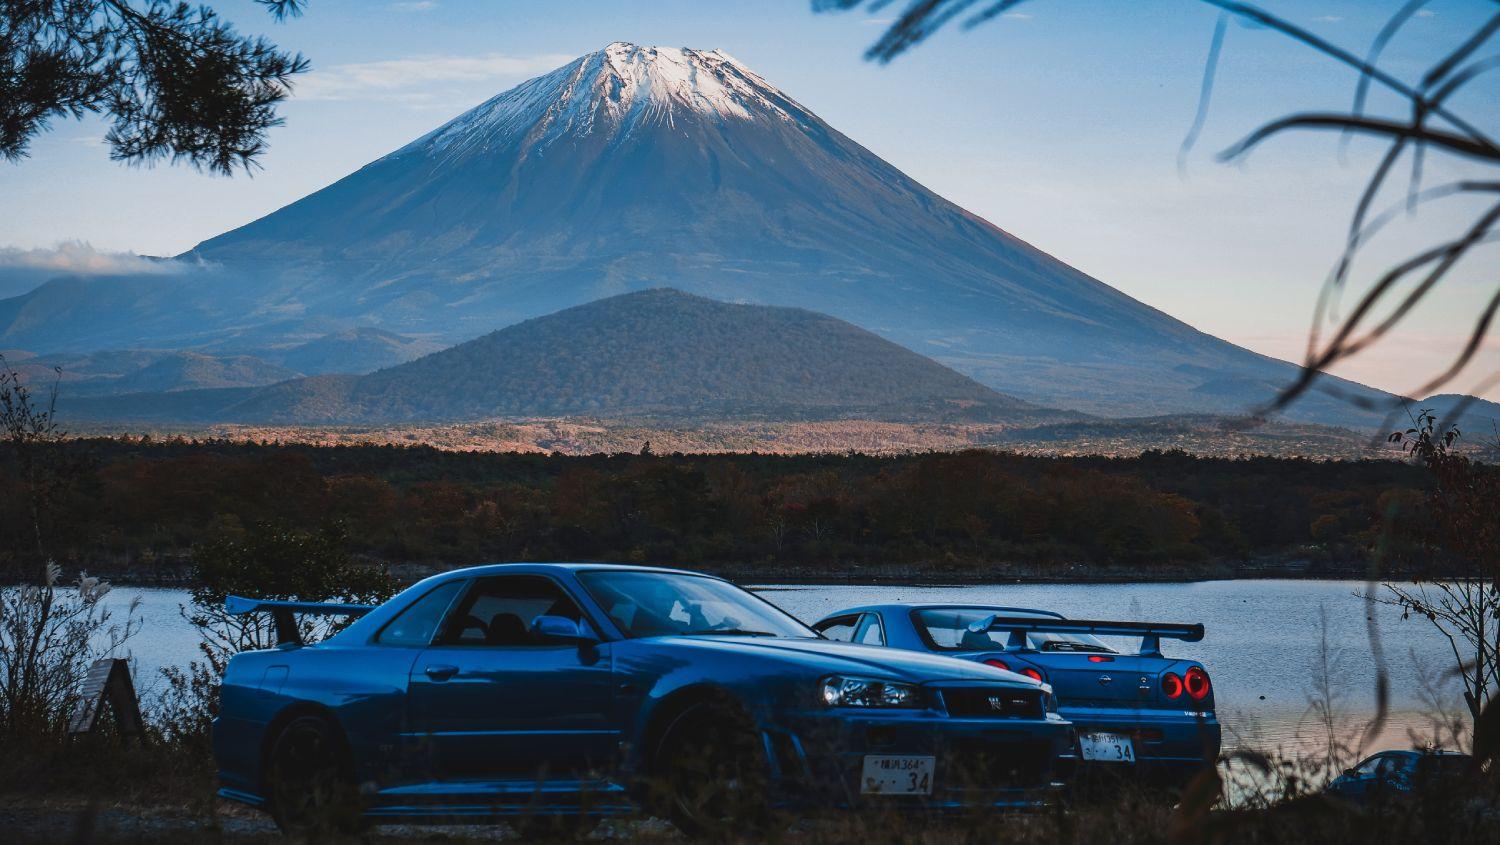 Nissan Skylines in front of Mount Fuji